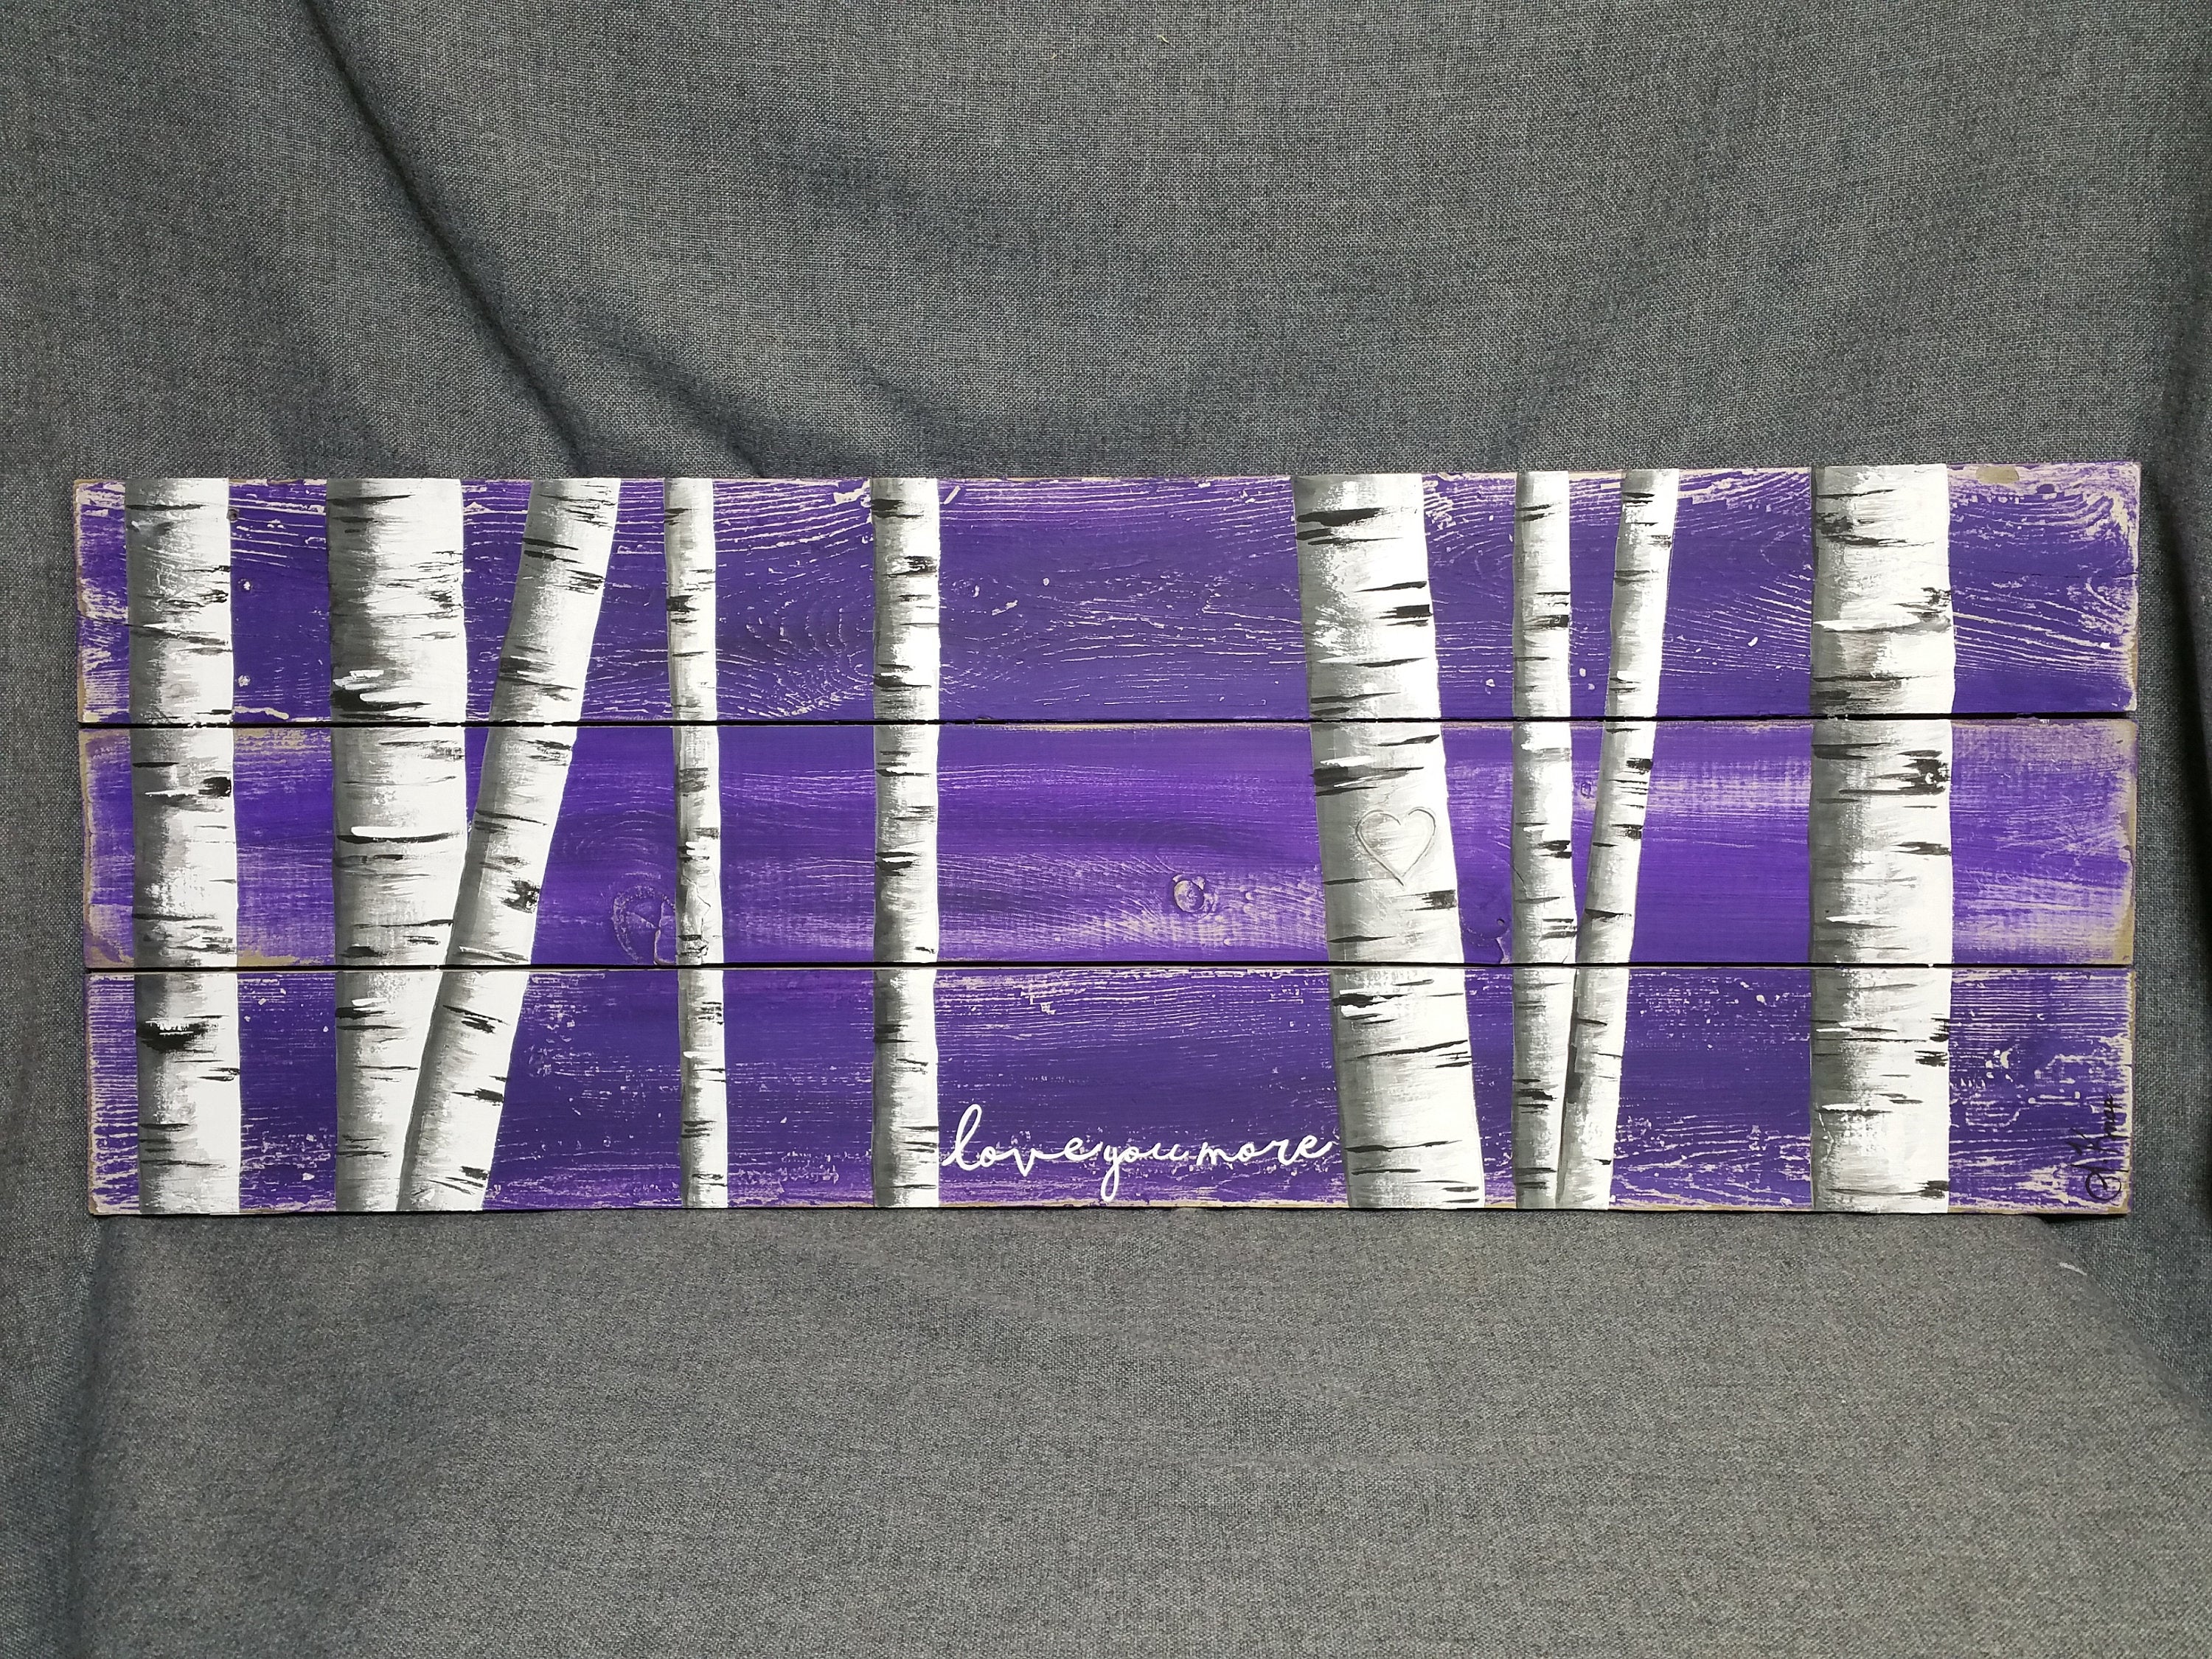 Hand painted white birch pallet art, love you more, carved heart tree, purple decor accent, couch artwork